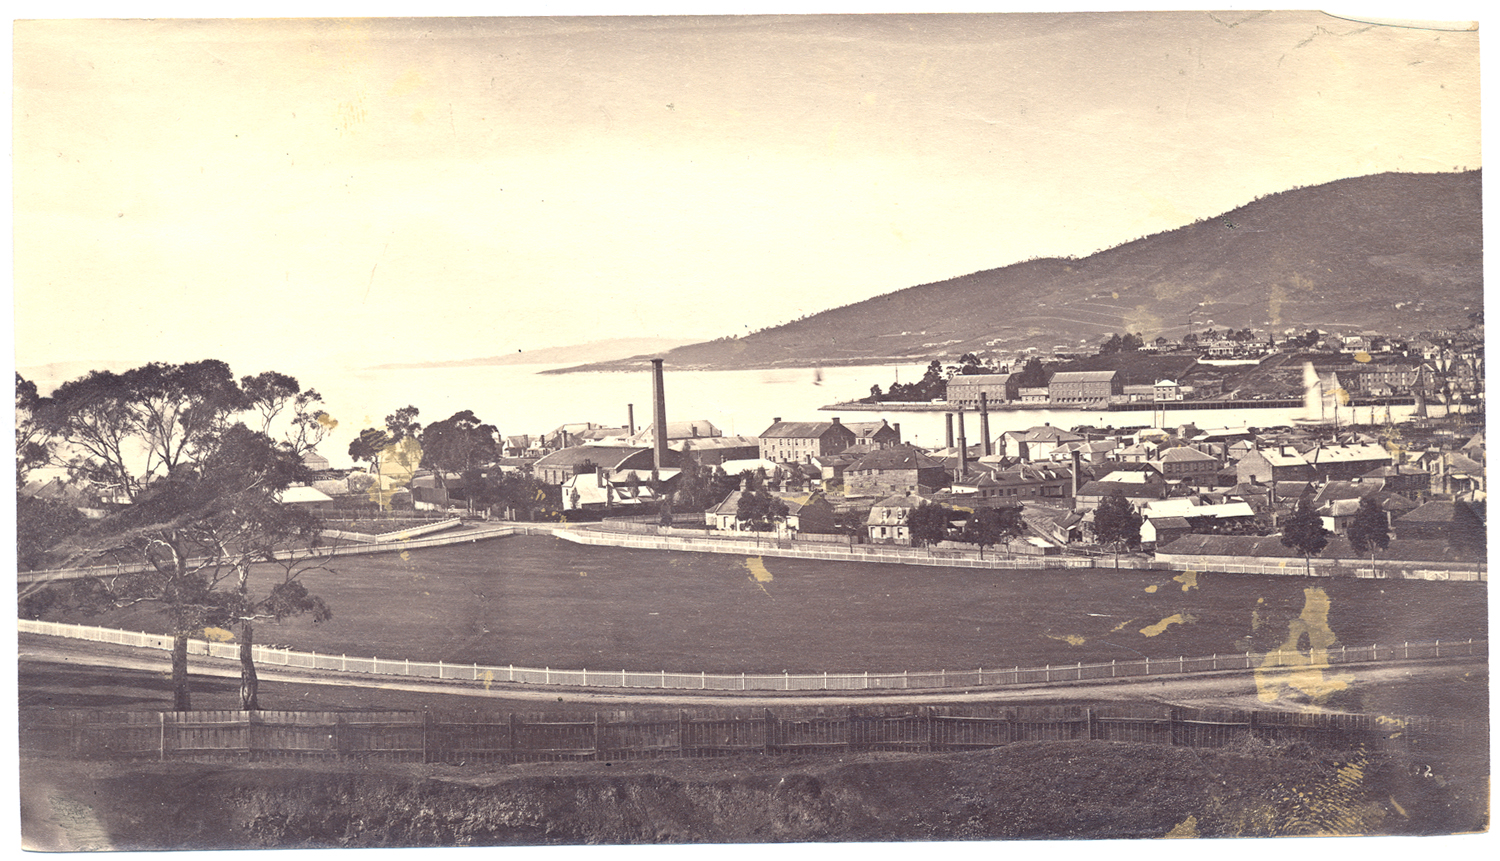 ... Quarry on Queen's Domain, Tasmania c.1870 - Library Open Repository